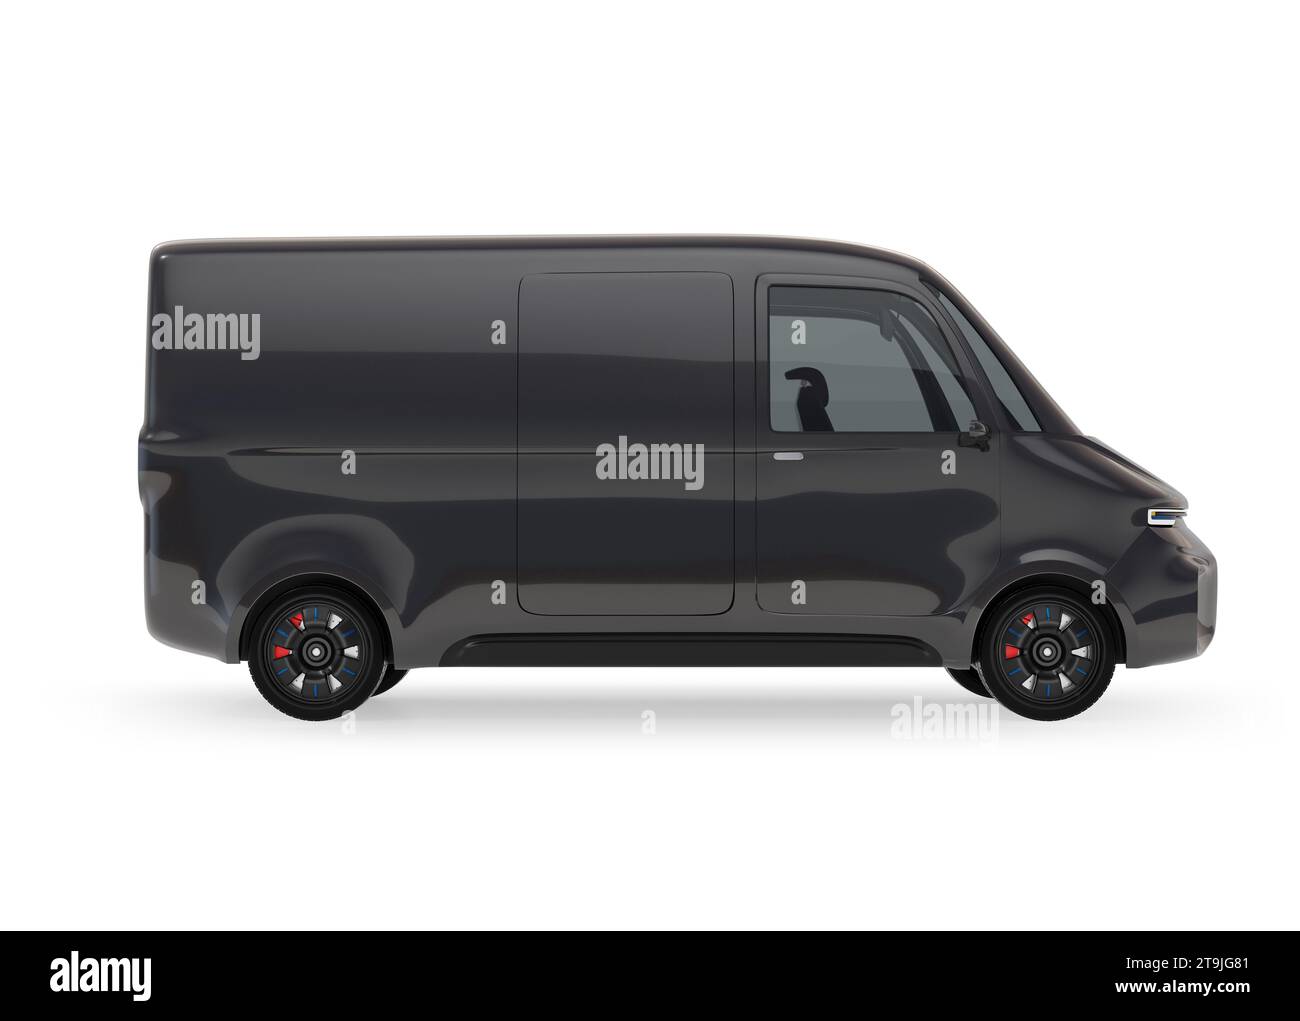 Side view of Black Electric Delivery Van isolated on white background. Generic design. 3D rendering image. Stock Photo